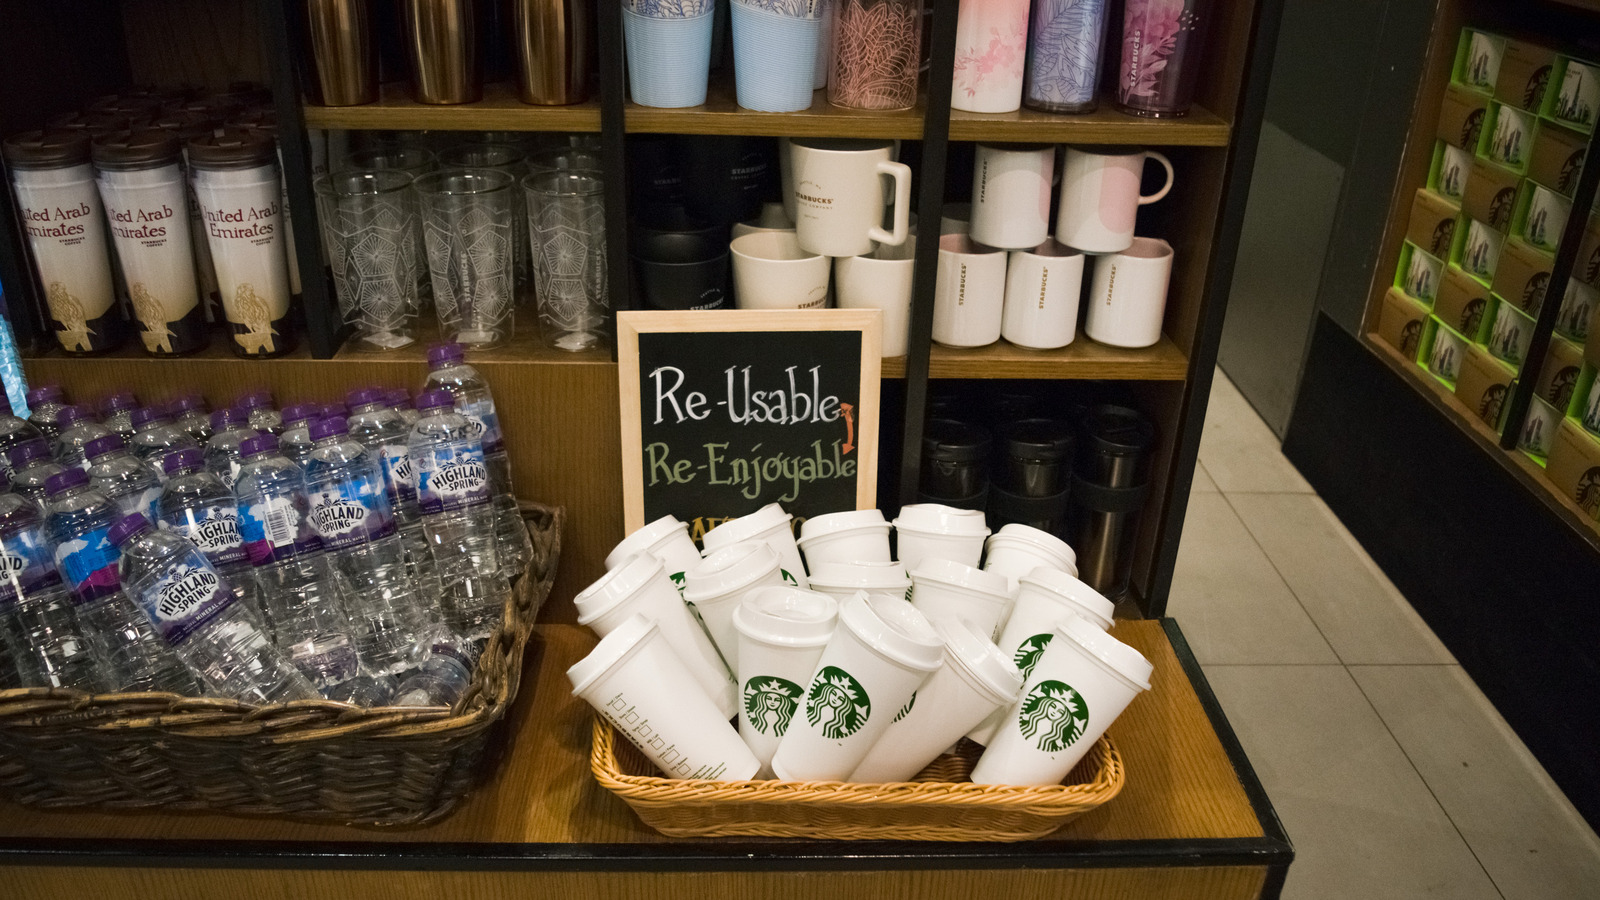 https://www.mashed.com/img/gallery/heres-how-to-grab-a-free-reusable-cup-at-starbucks-this-week/l-intro-1650344932.jpg